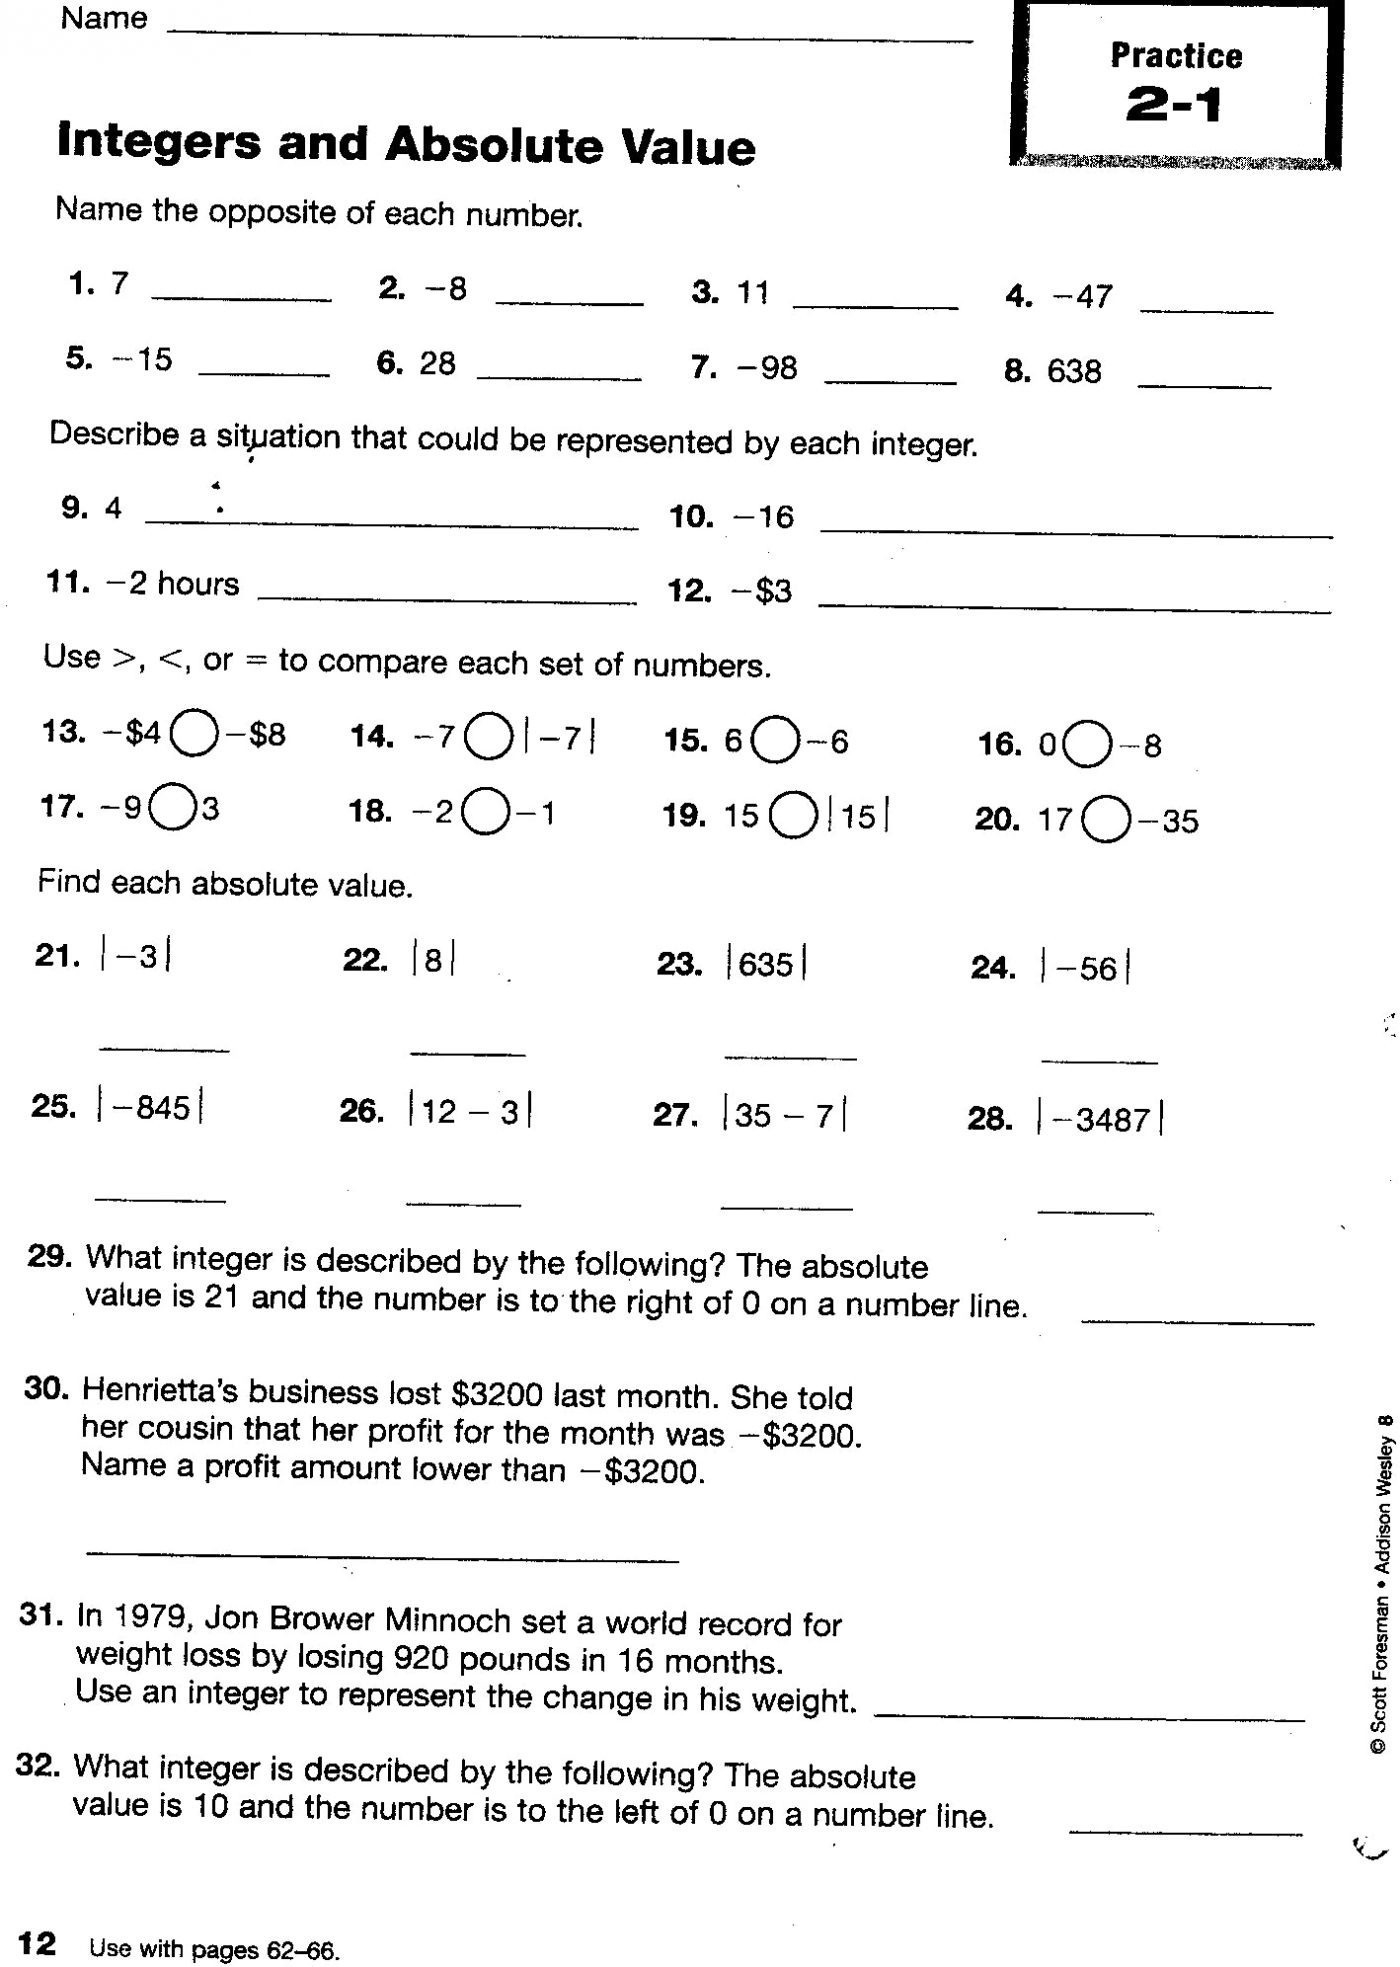 Free Printable Ged Practice Test With Answer Key 74 Images db excel com